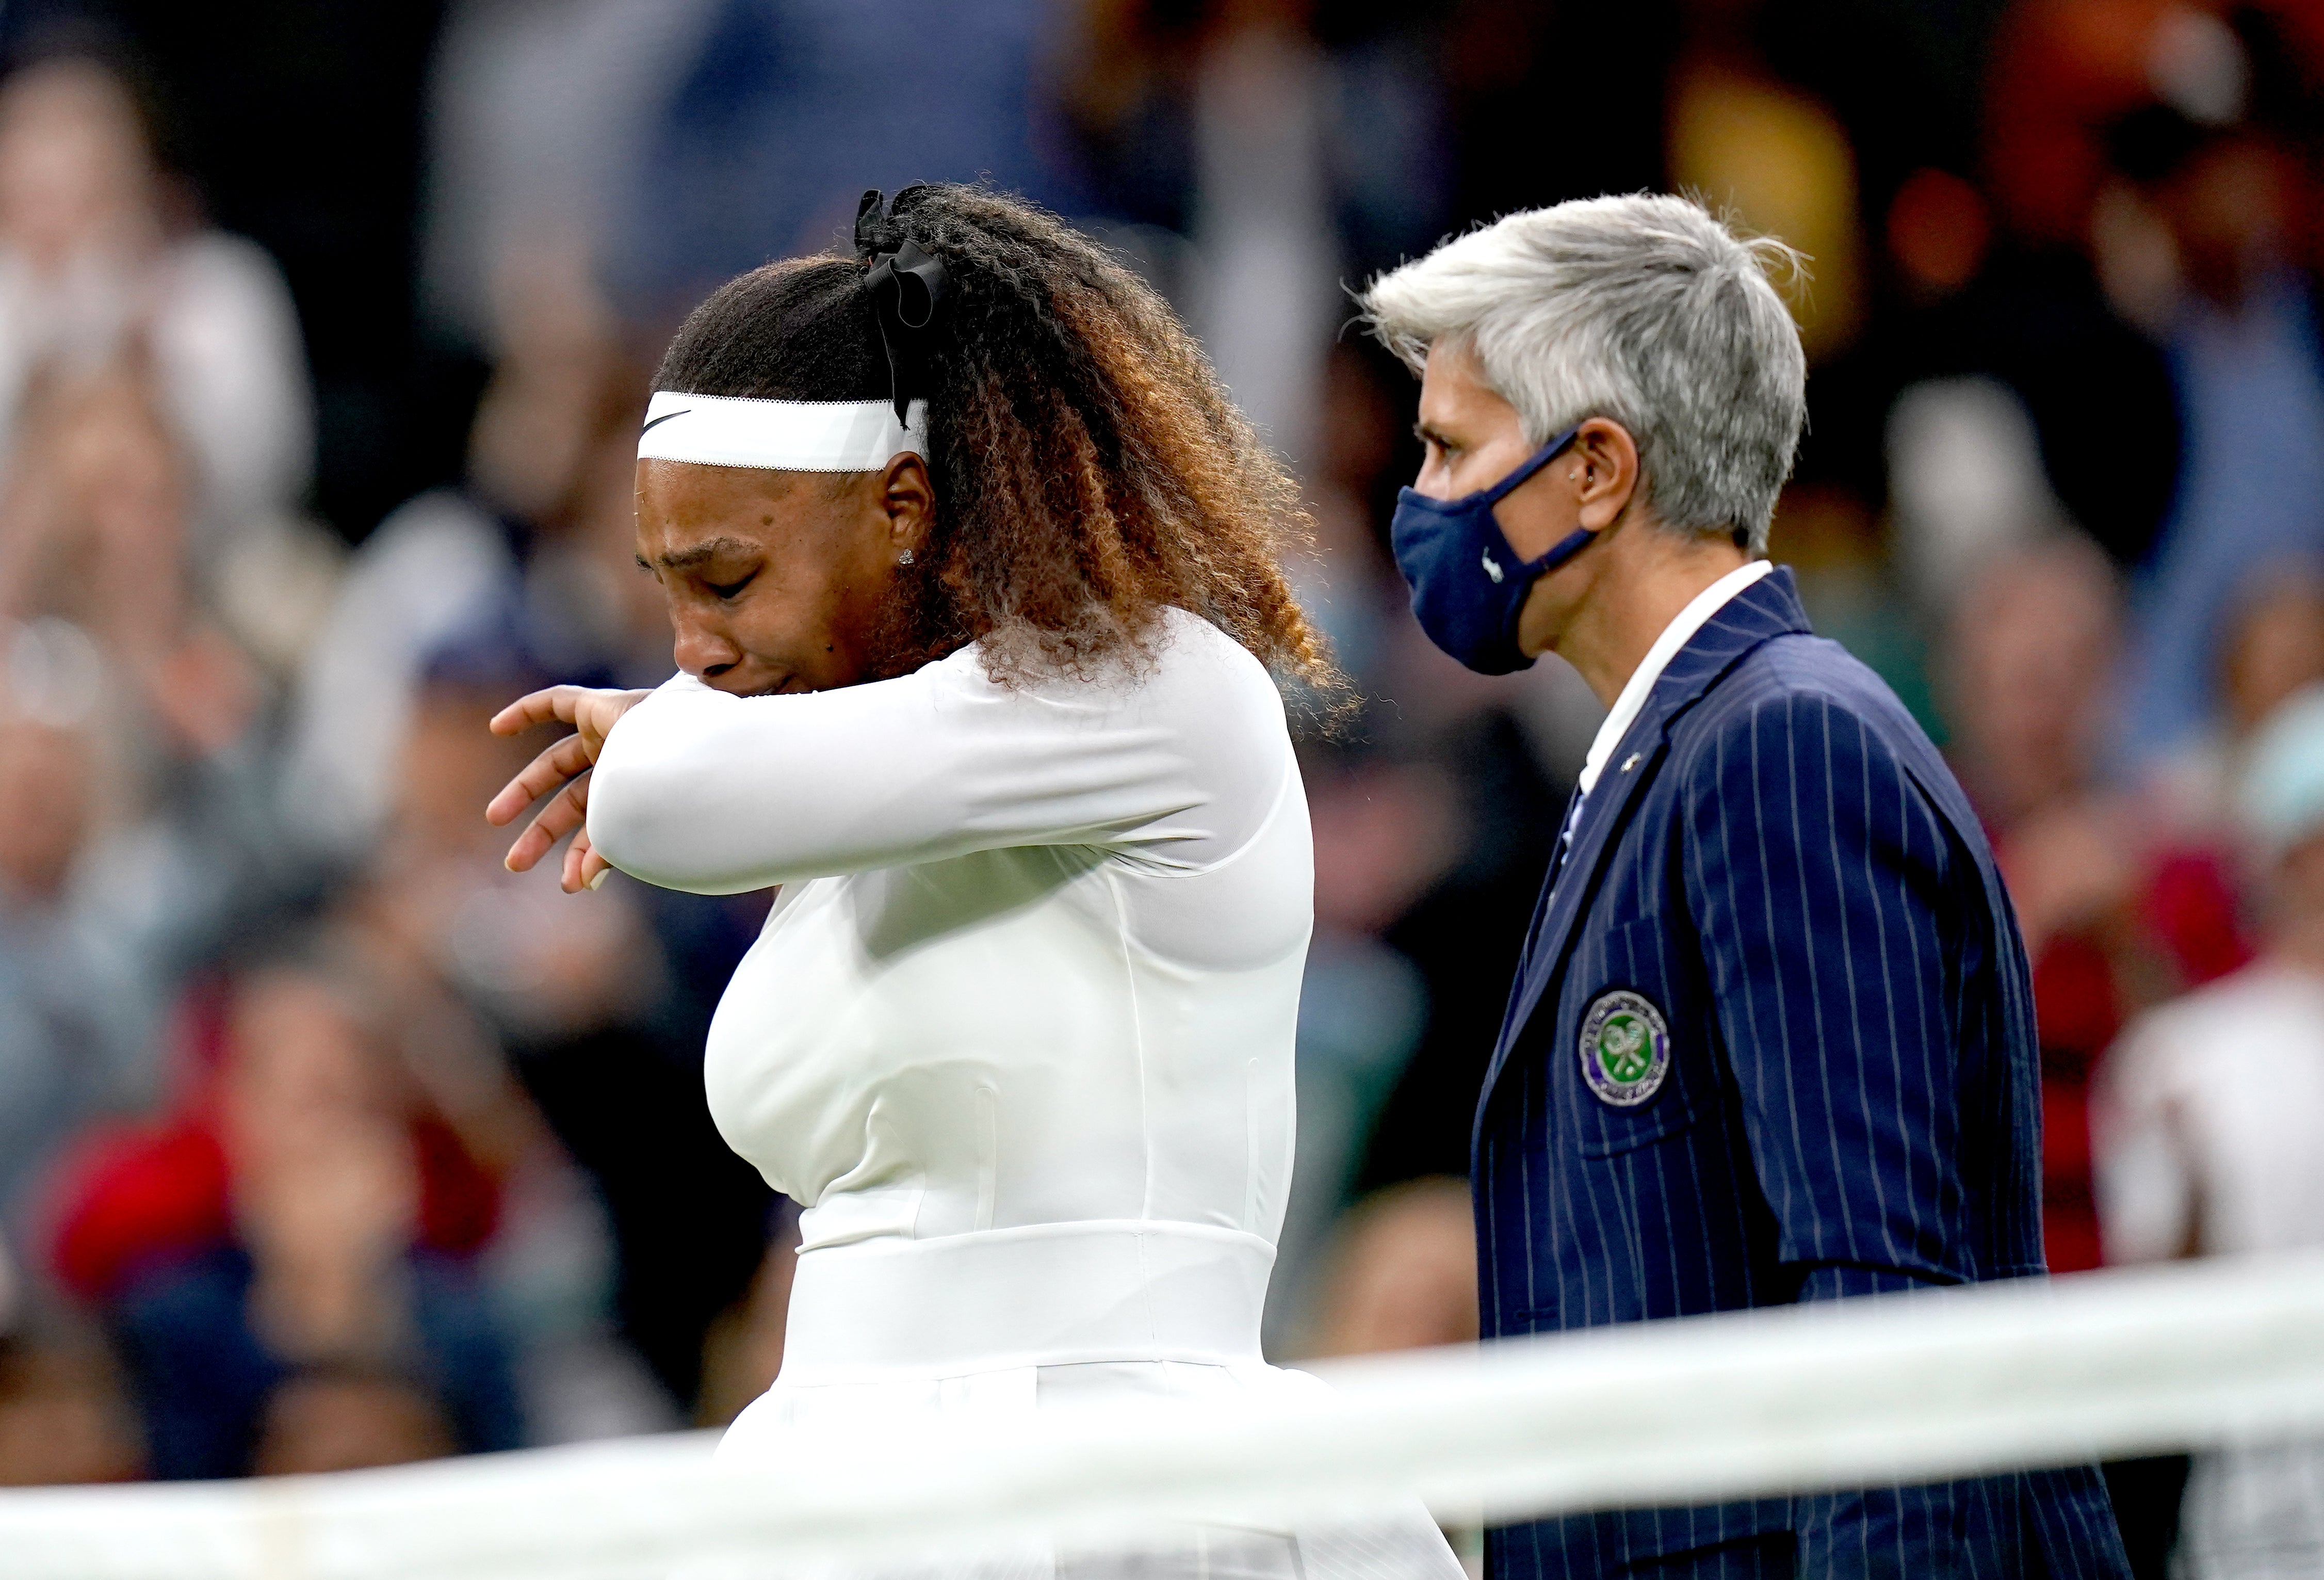 Serena Williams had to retire in the first round of Wimbledon